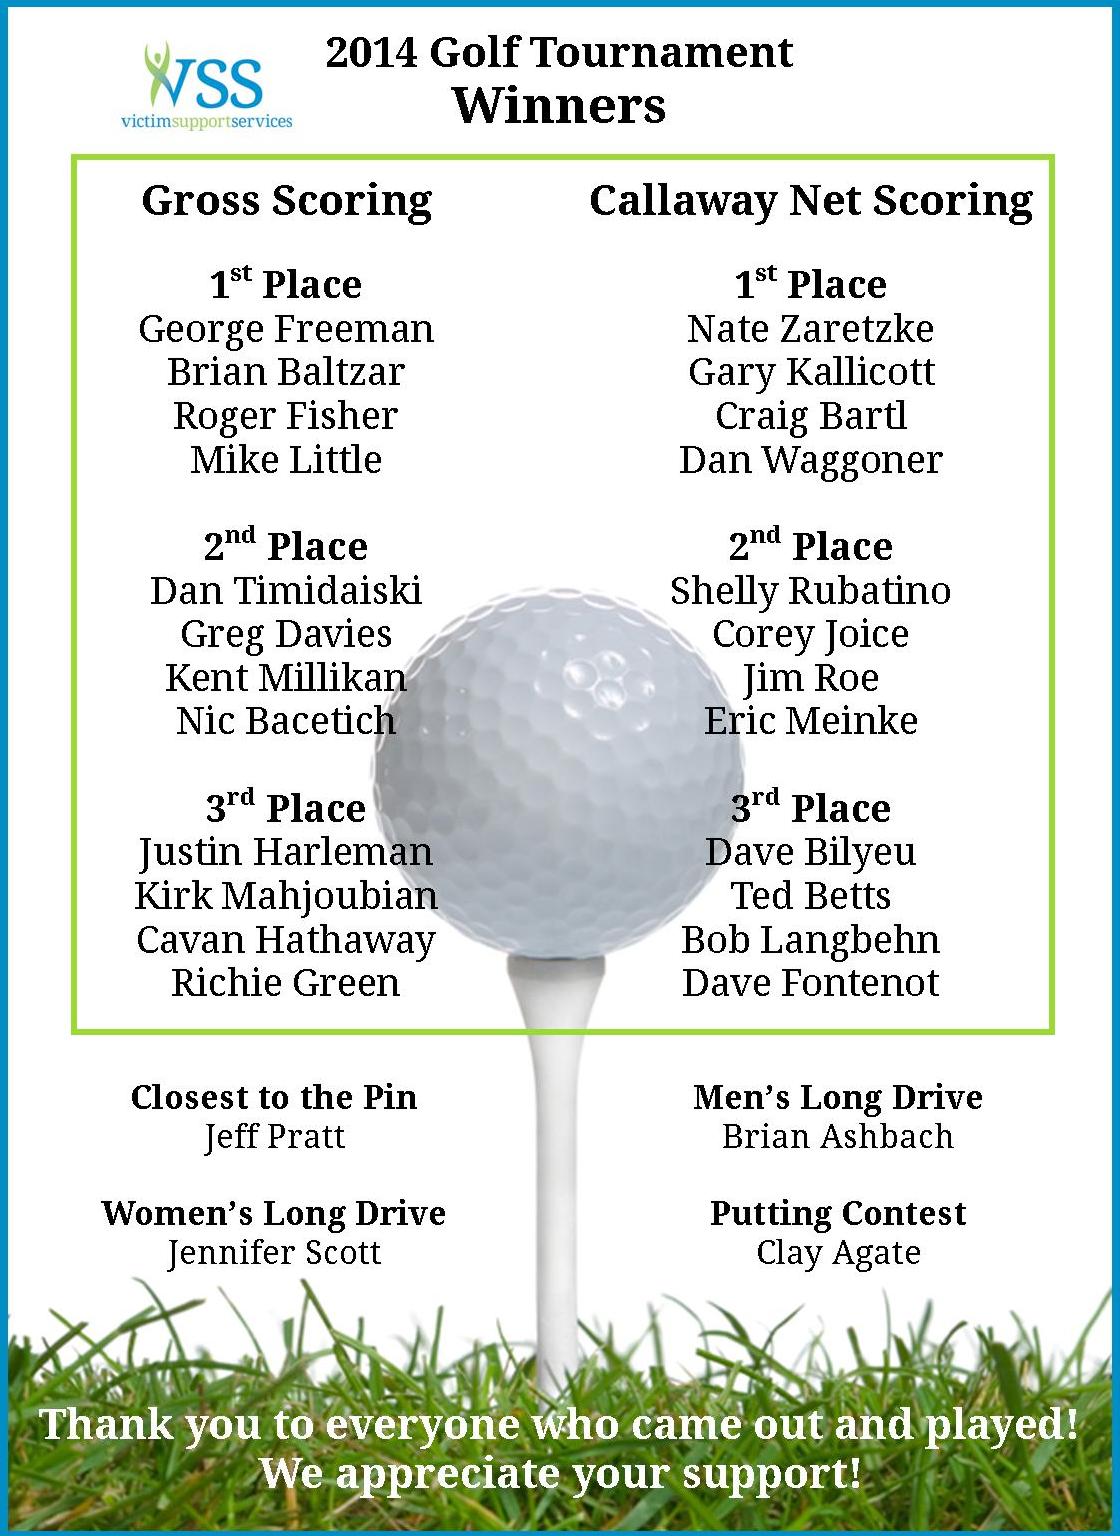 golf-tournament-thank-you-victim-support-services